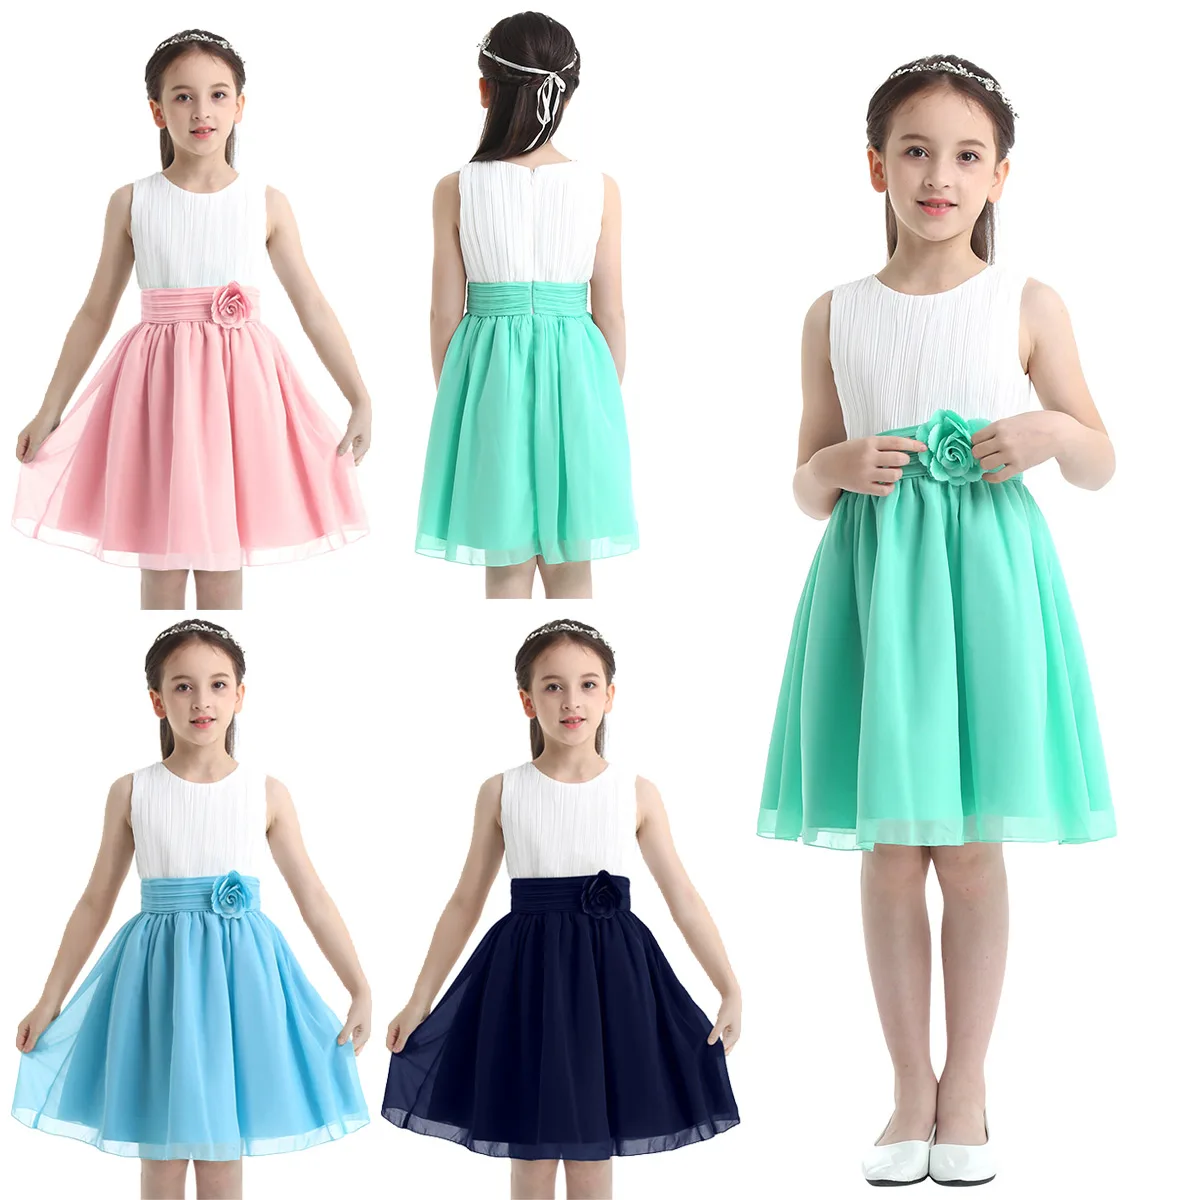 Flower Girls Chiffon Dresses 2020 Sleeveless Tulle Ball Gown Pageant Dresses For Girls First Communion Party Summer Tutu Dresses